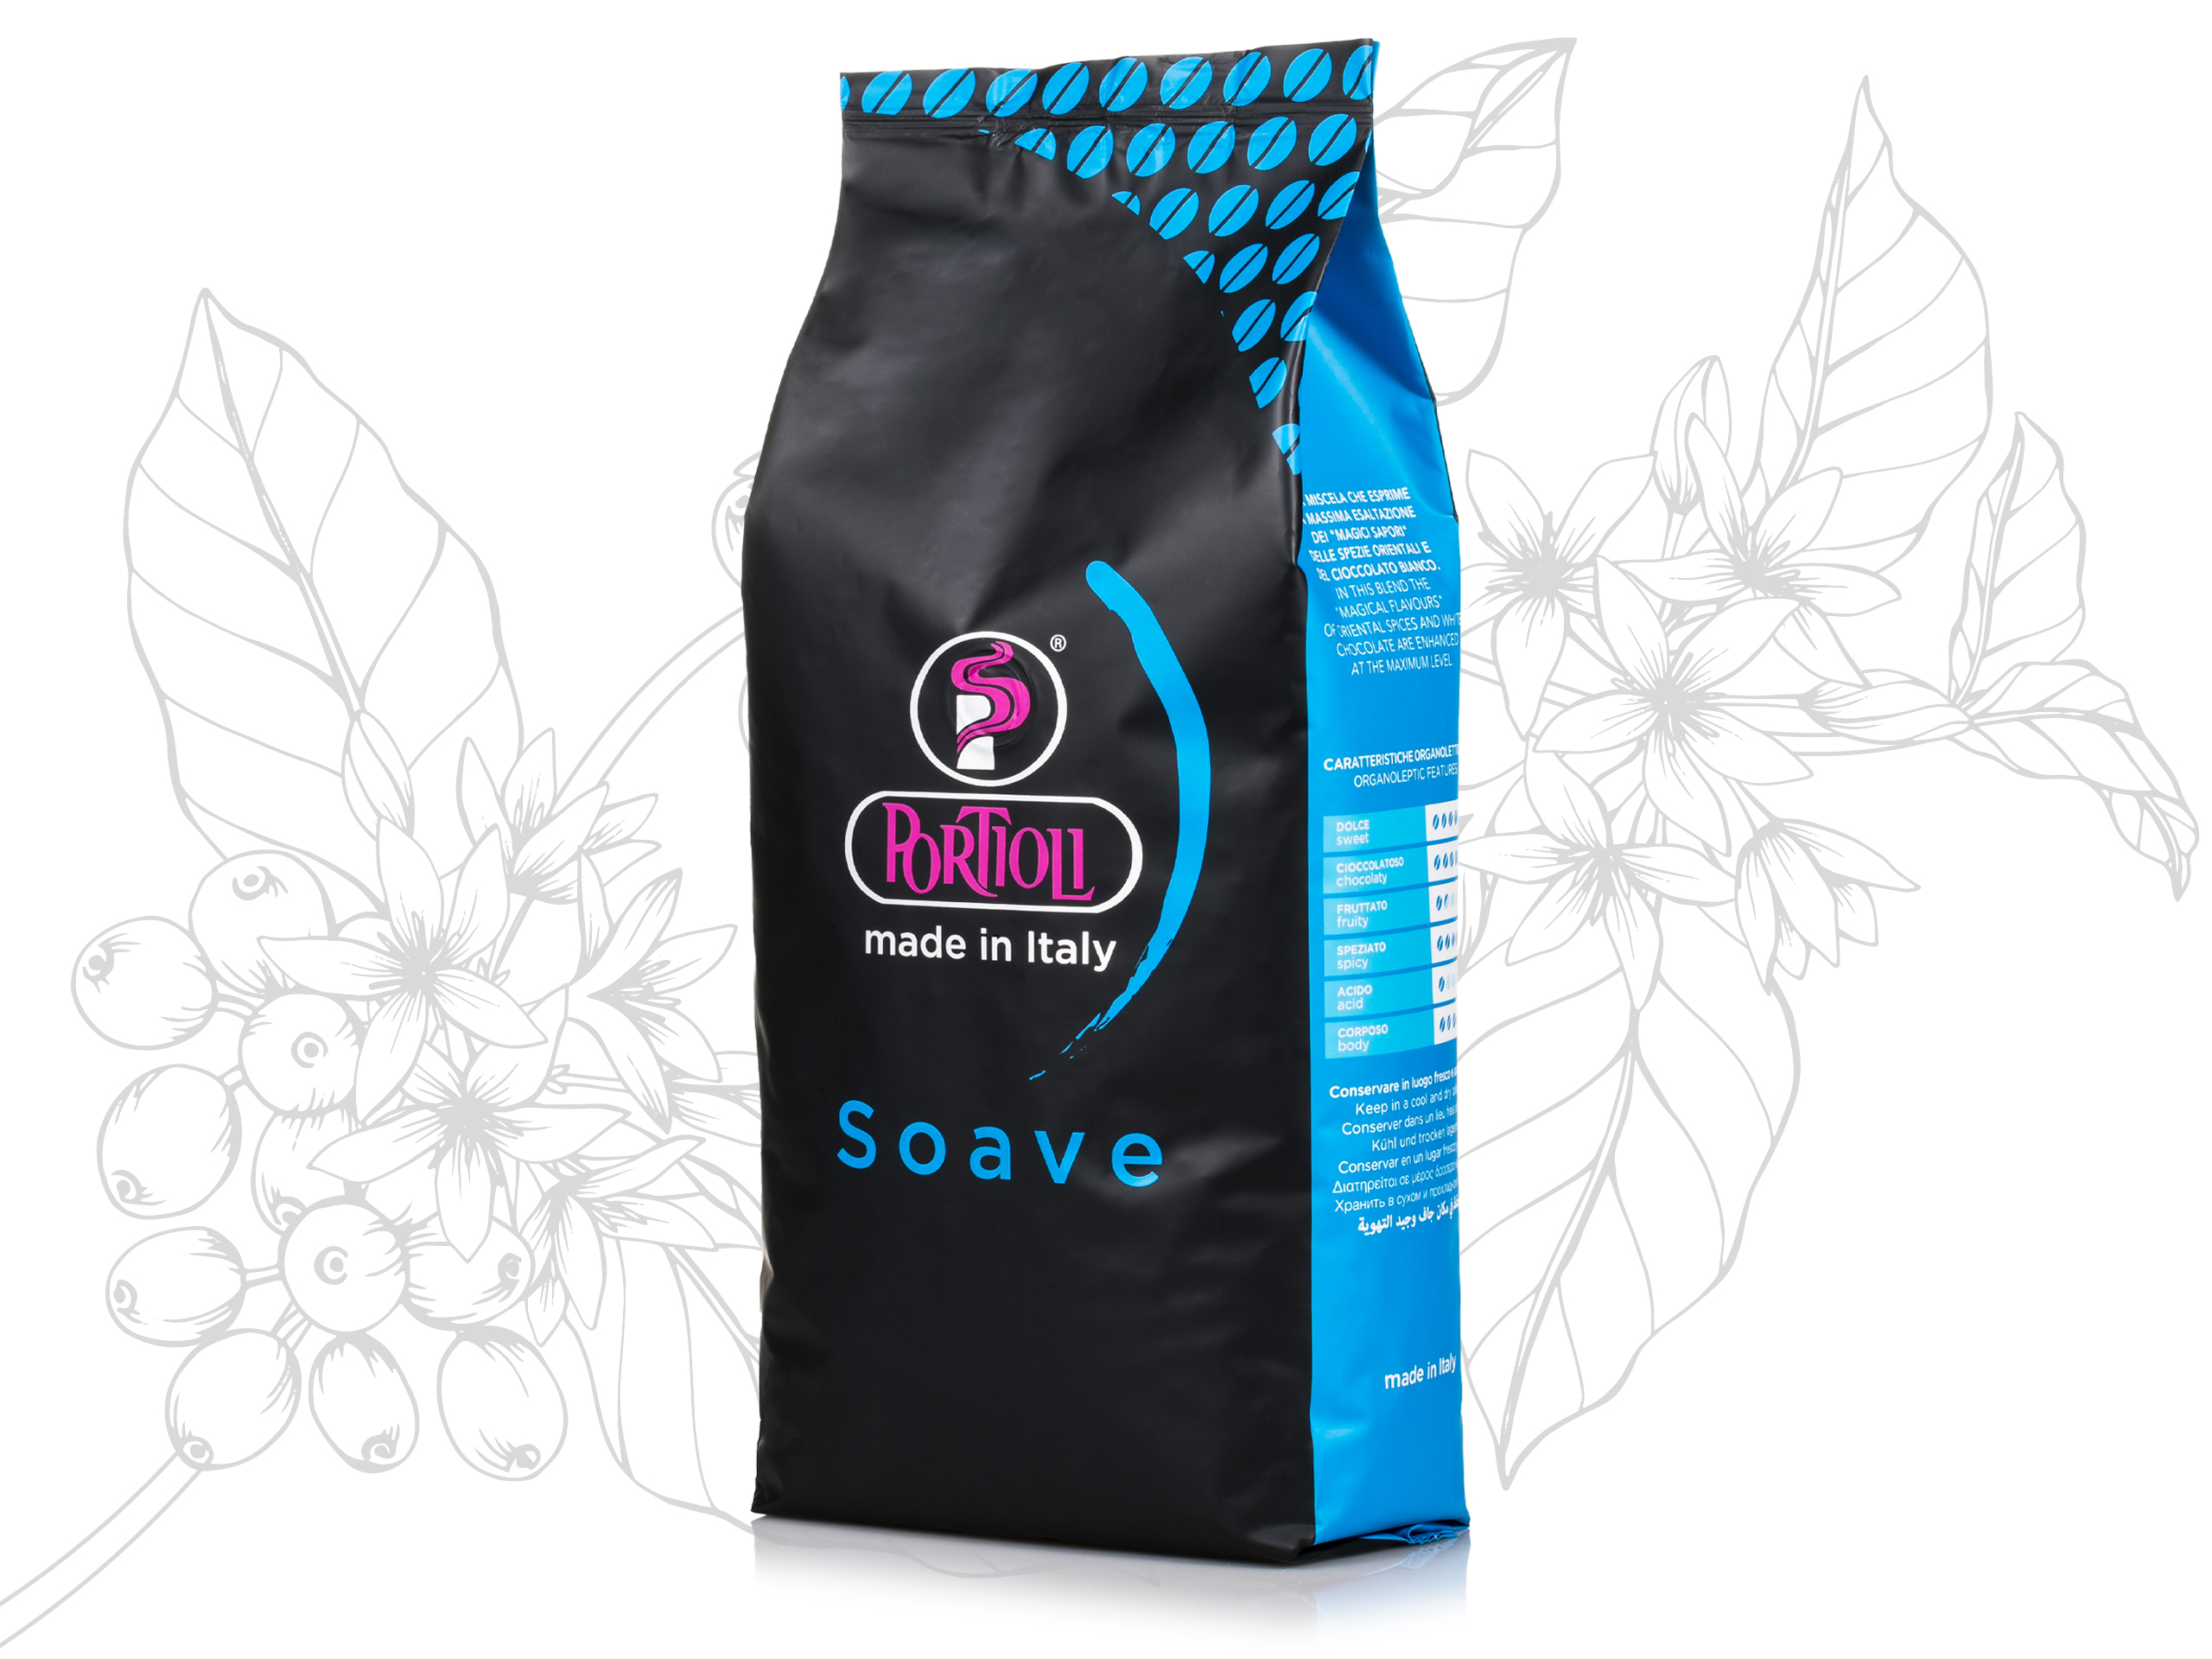 Soave coffee blend for bars